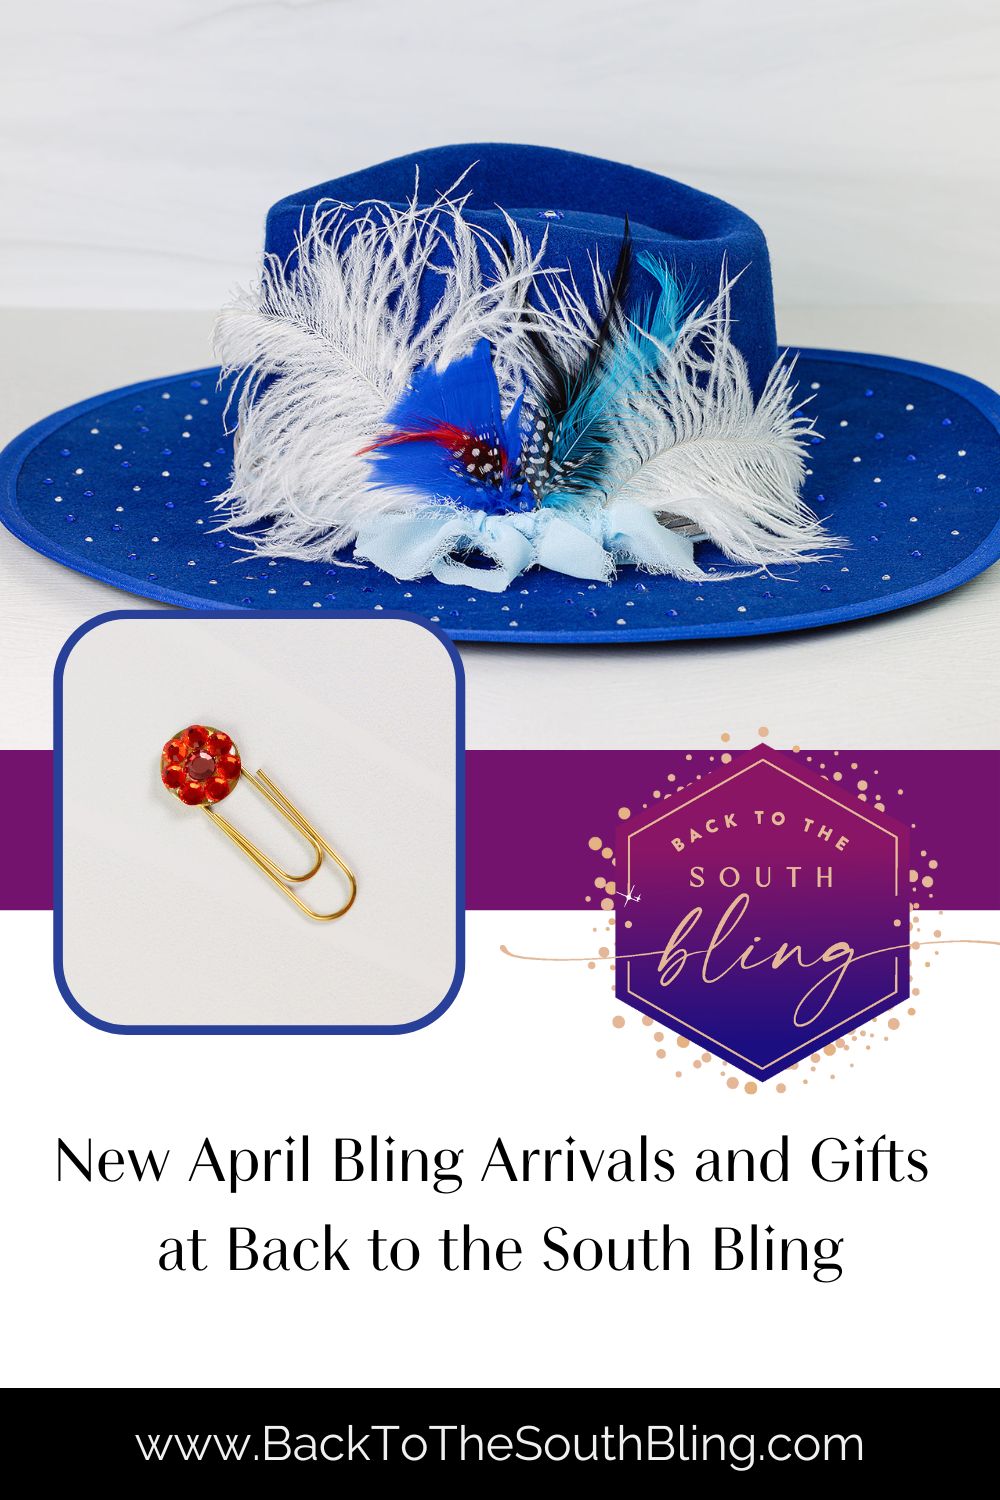 New April Bling Arrivals and Gifts at Back to the South Bling